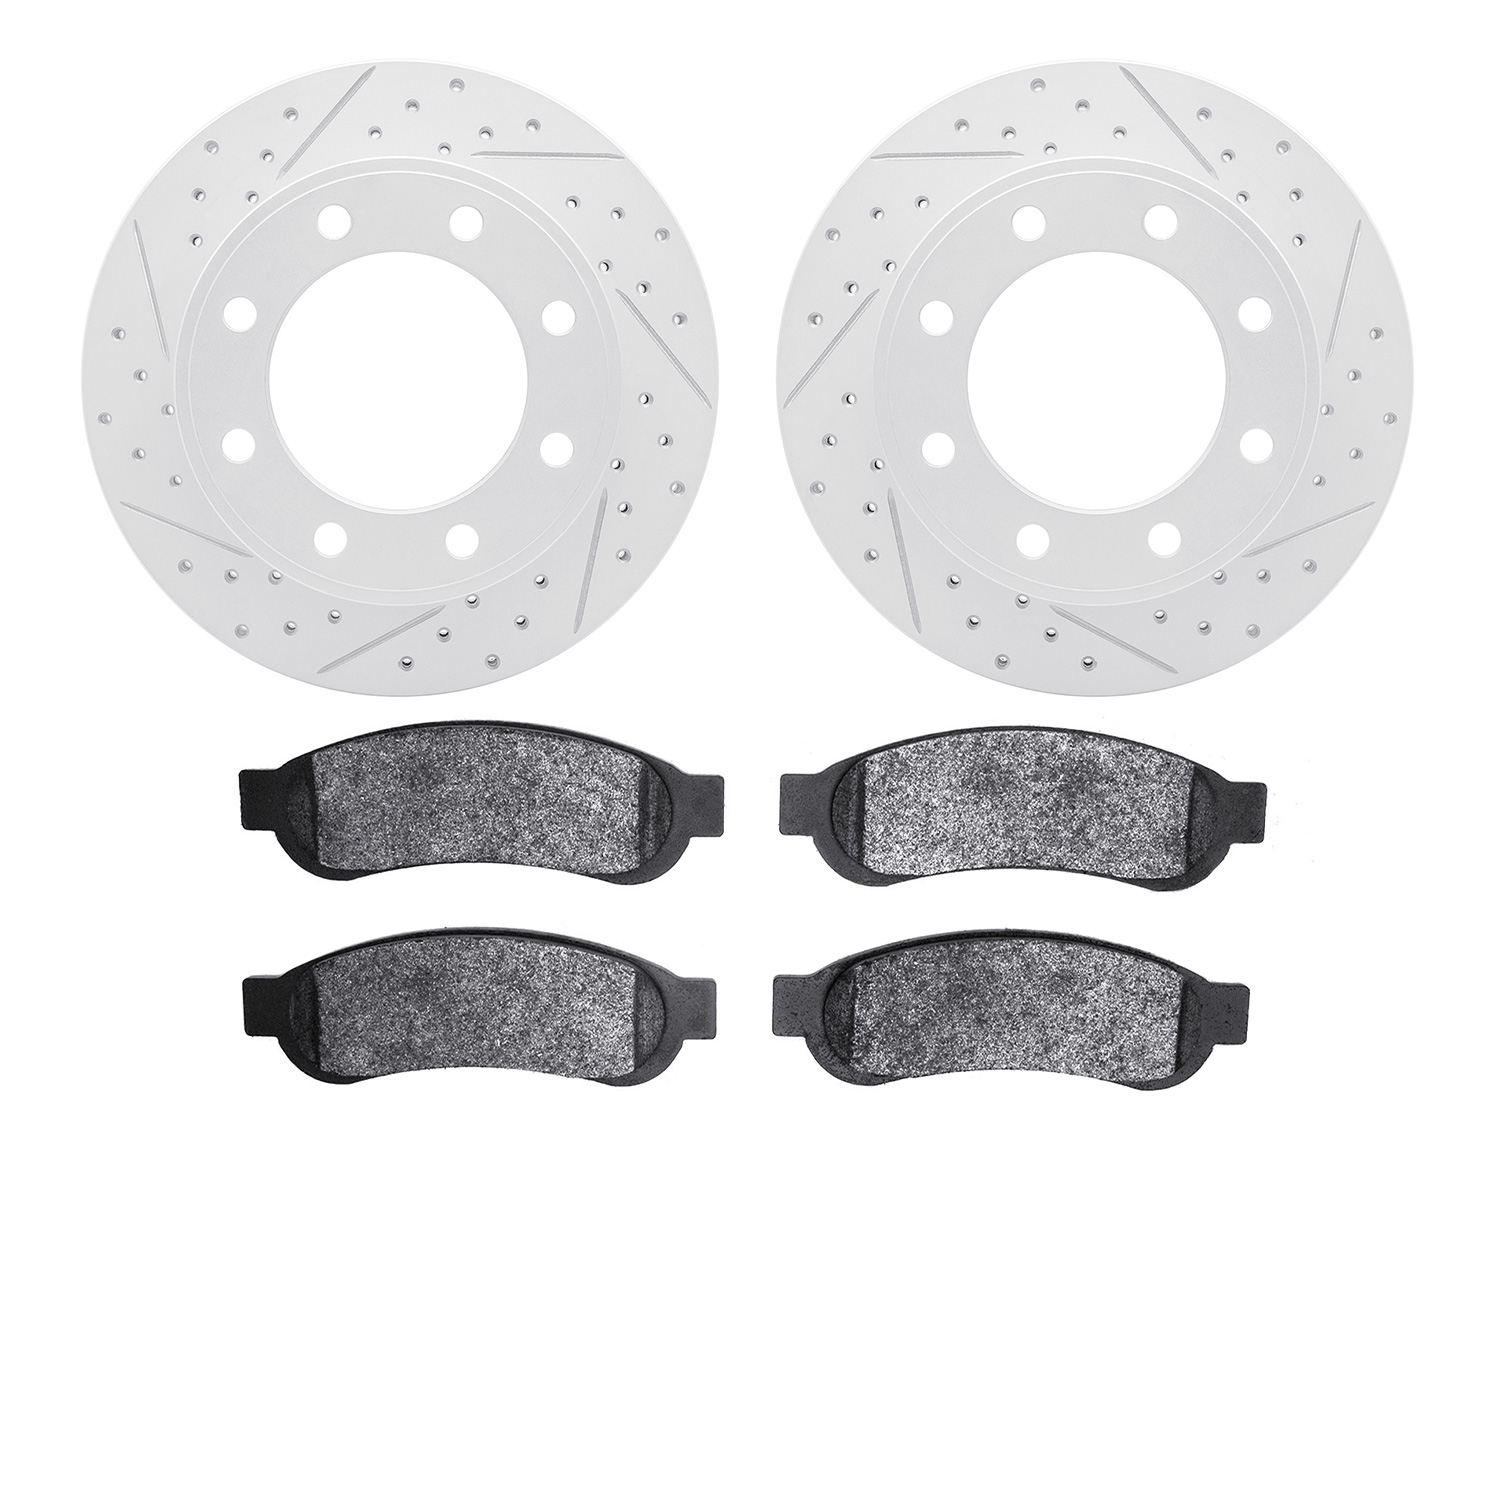 2502-54181 Geoperformance Drilled/Slotted Rotors w/5000 Advanced Brake Pads Kit, 2010-2012 Ford/Lincoln/Mercury/Mazda, Position: